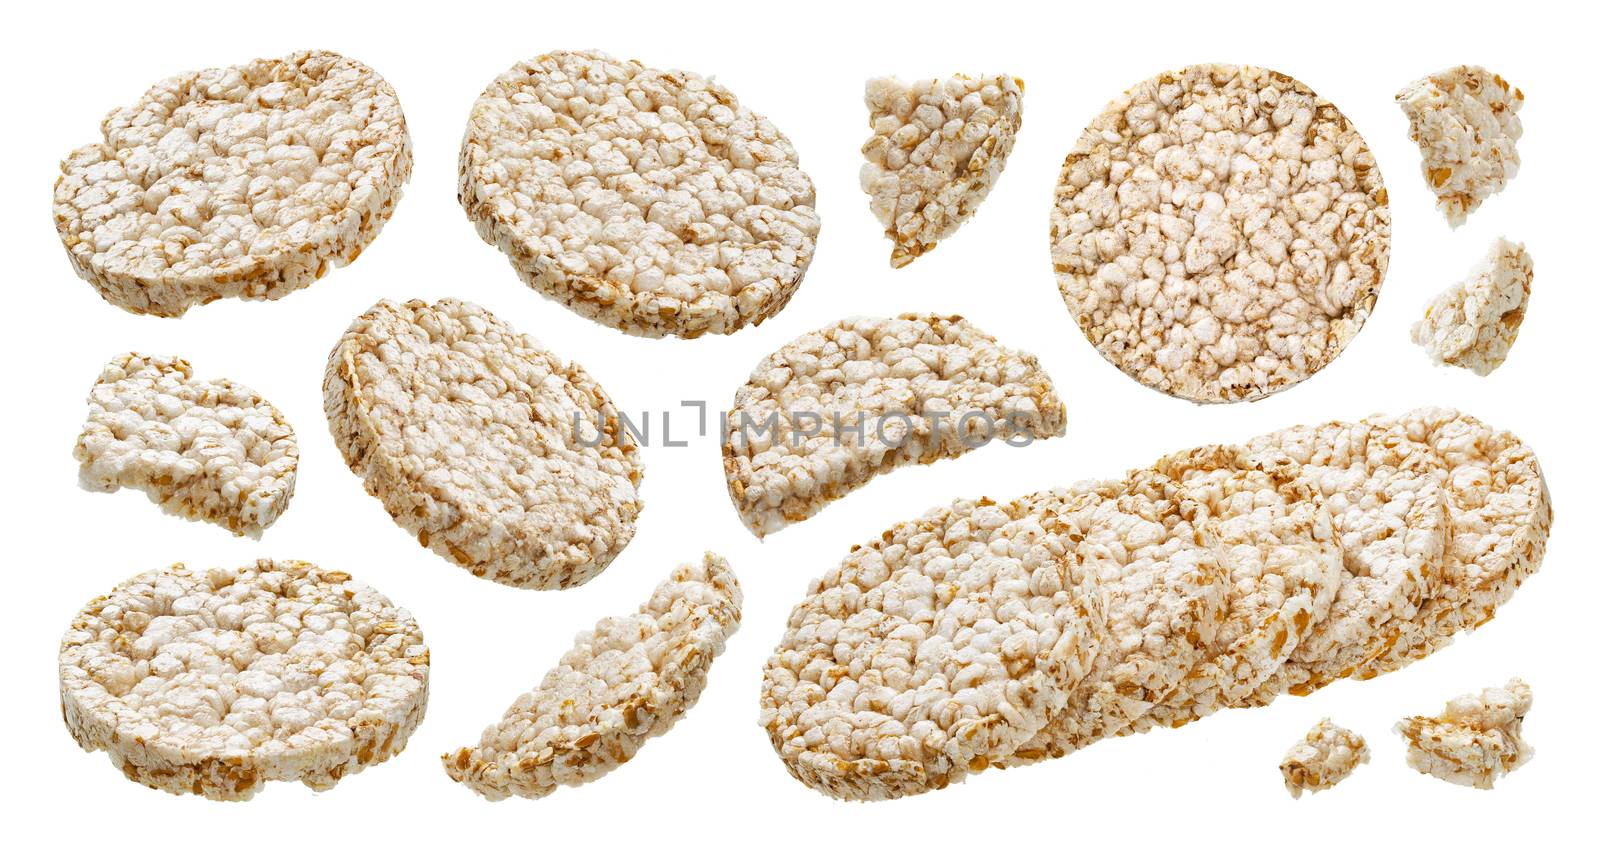 Puffed rice bread isolated on white background, diet crispy round rice waffles by xamtiw